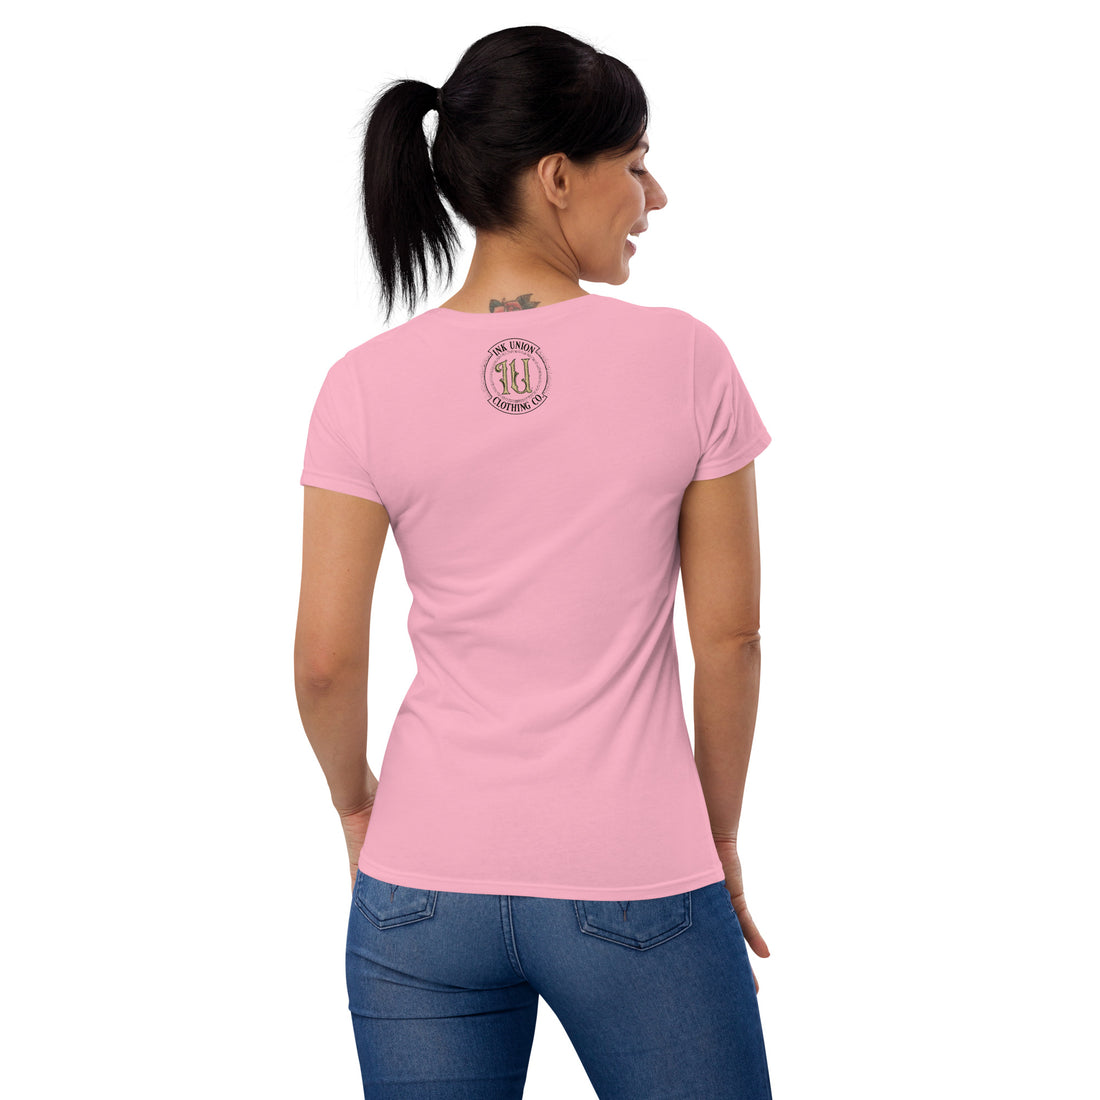 The rear view of an attractive woman wearing a pink t-shirt with a small gold and black Ink Union badge logo centered just under the neckline. 